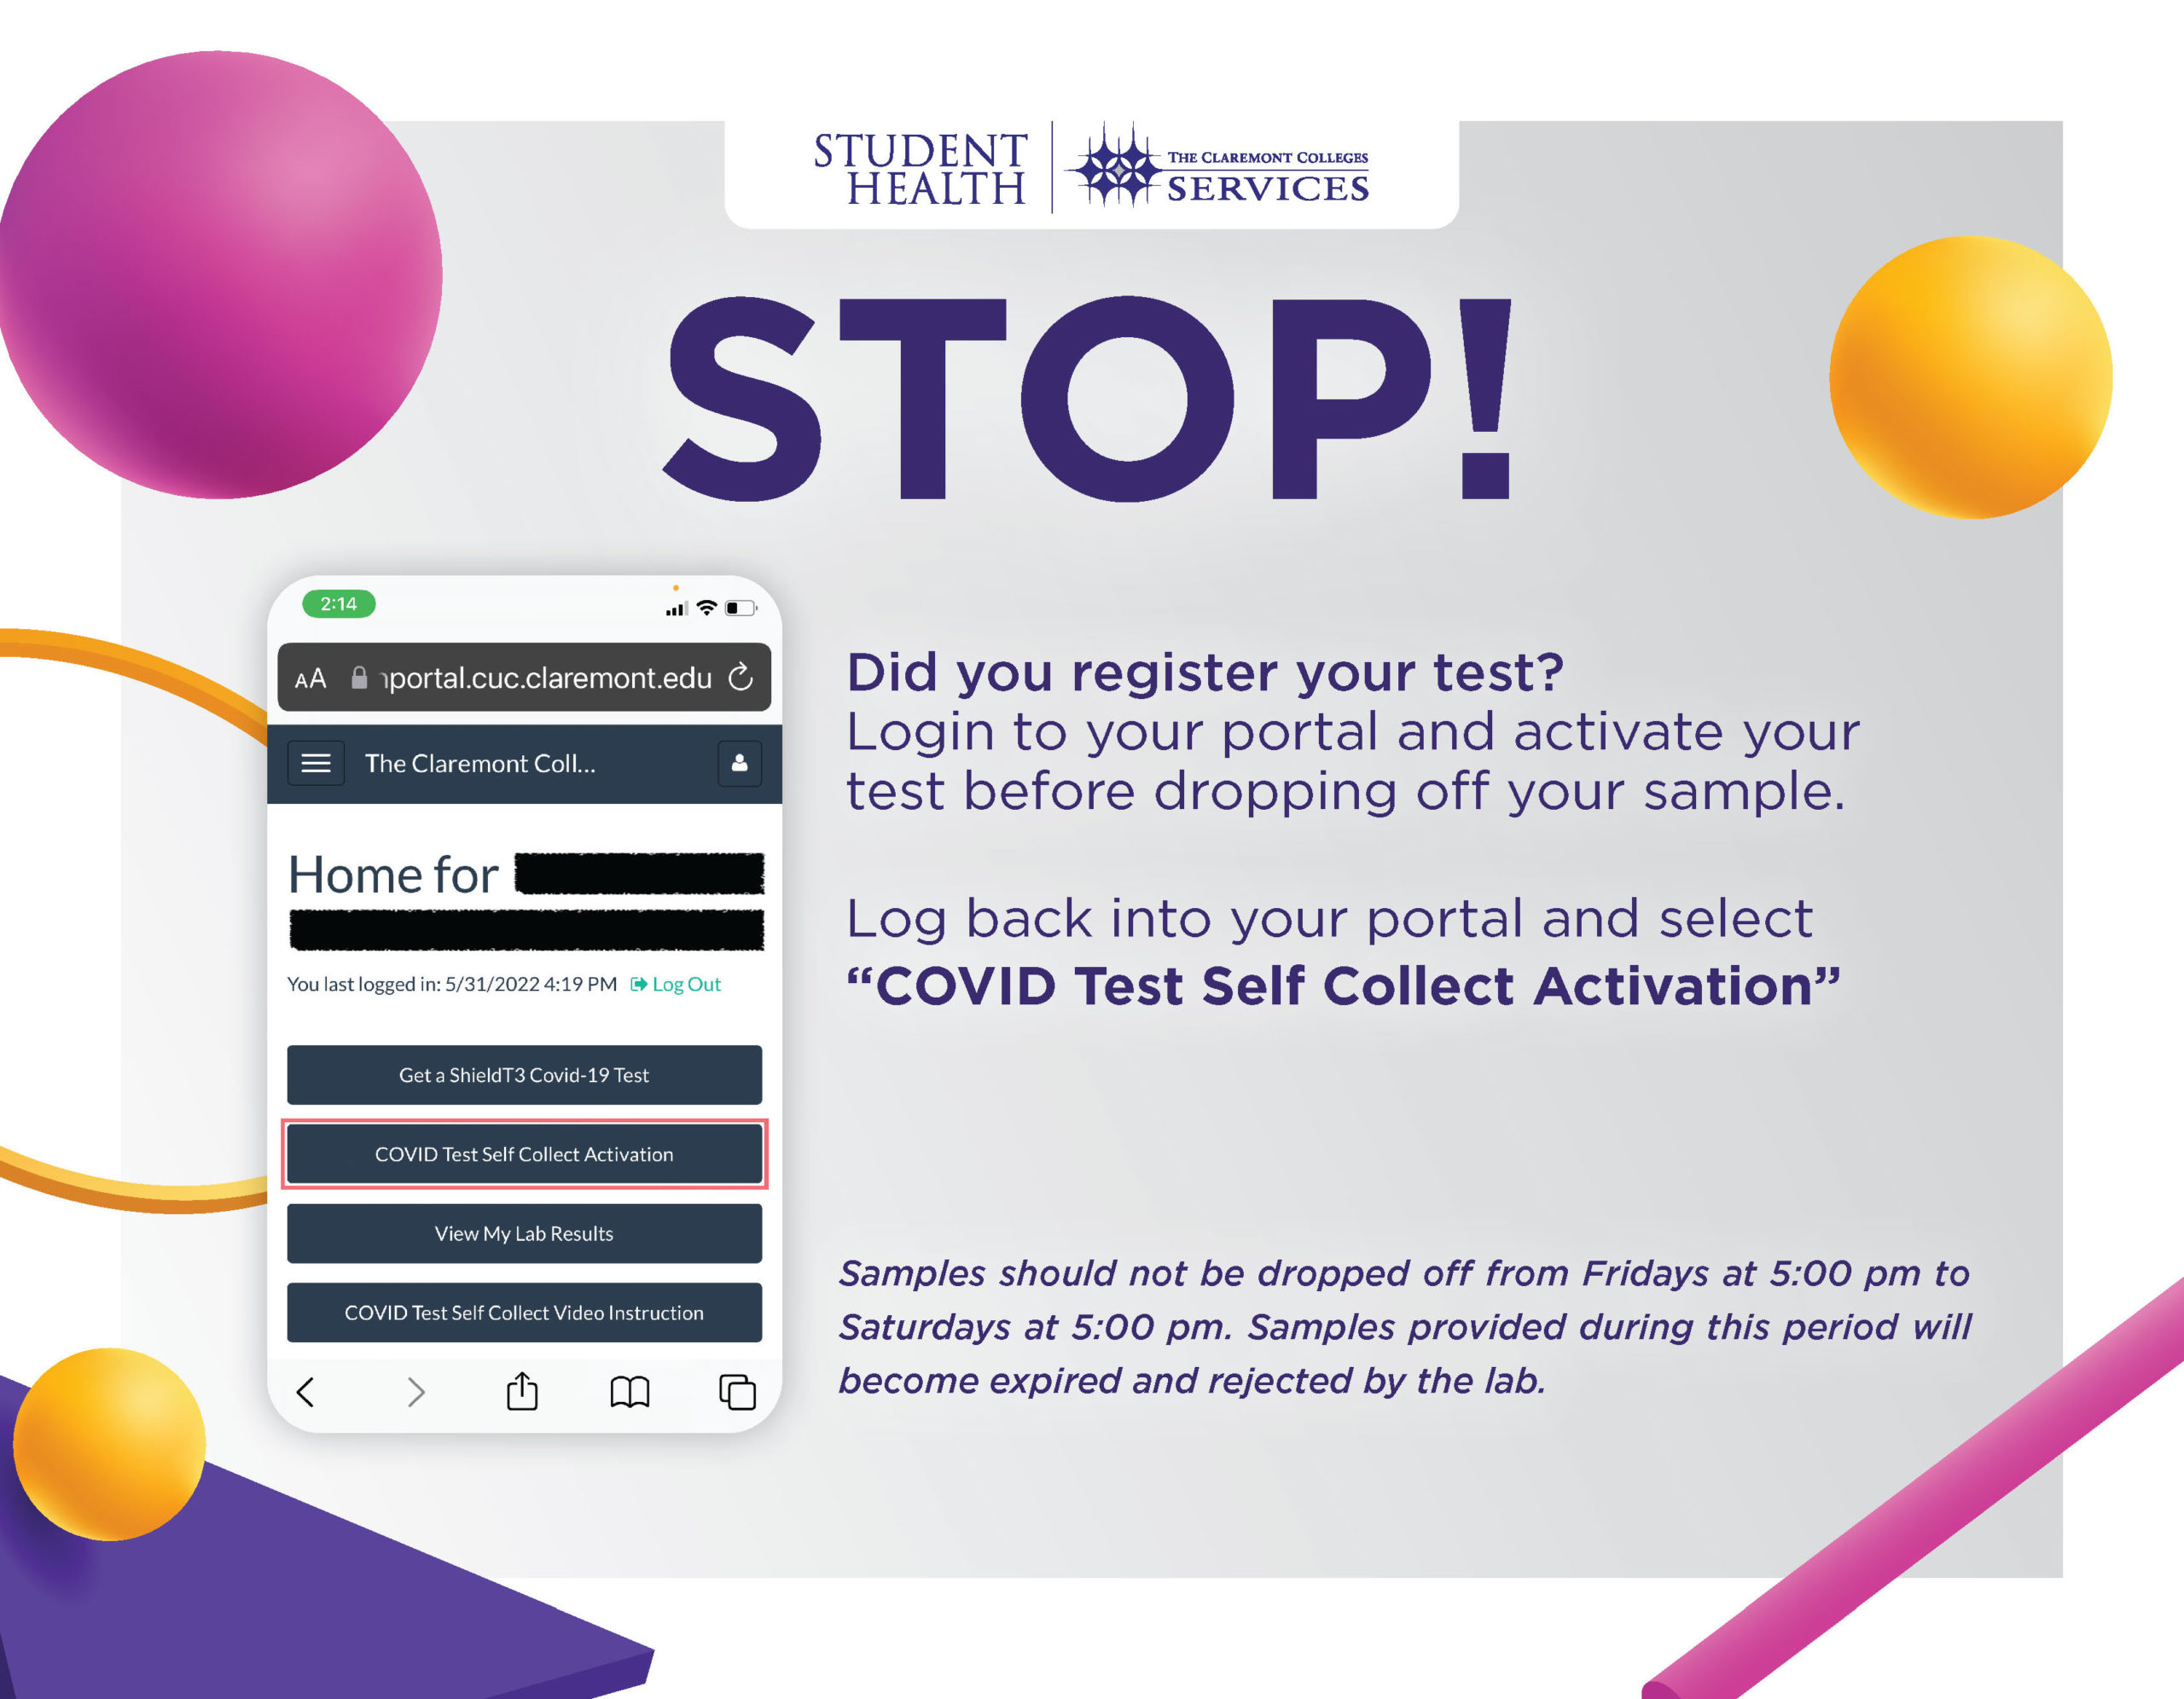 Did you register your COVID test?